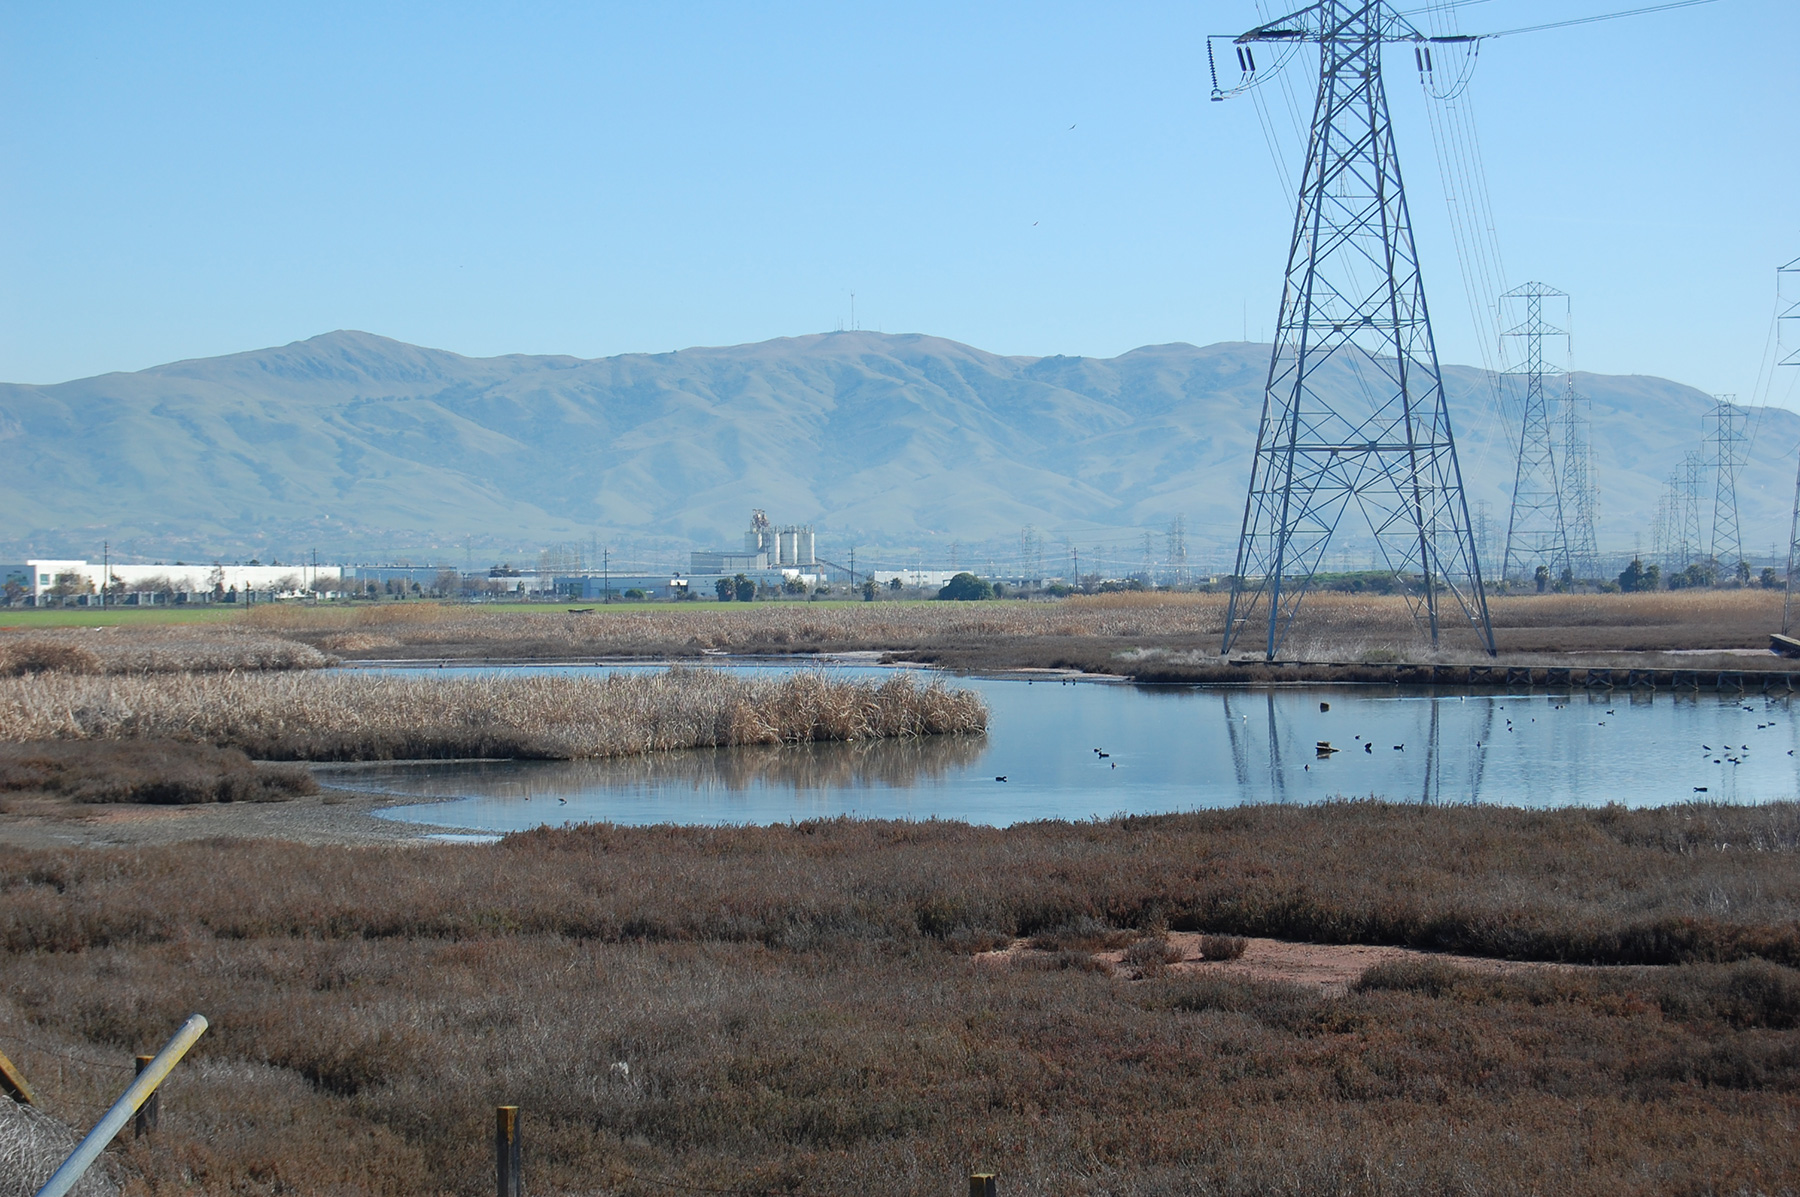 Bay Planners Highlight Another Missing Element in California Environmental Law: It Doesn’t Account Well for the Future